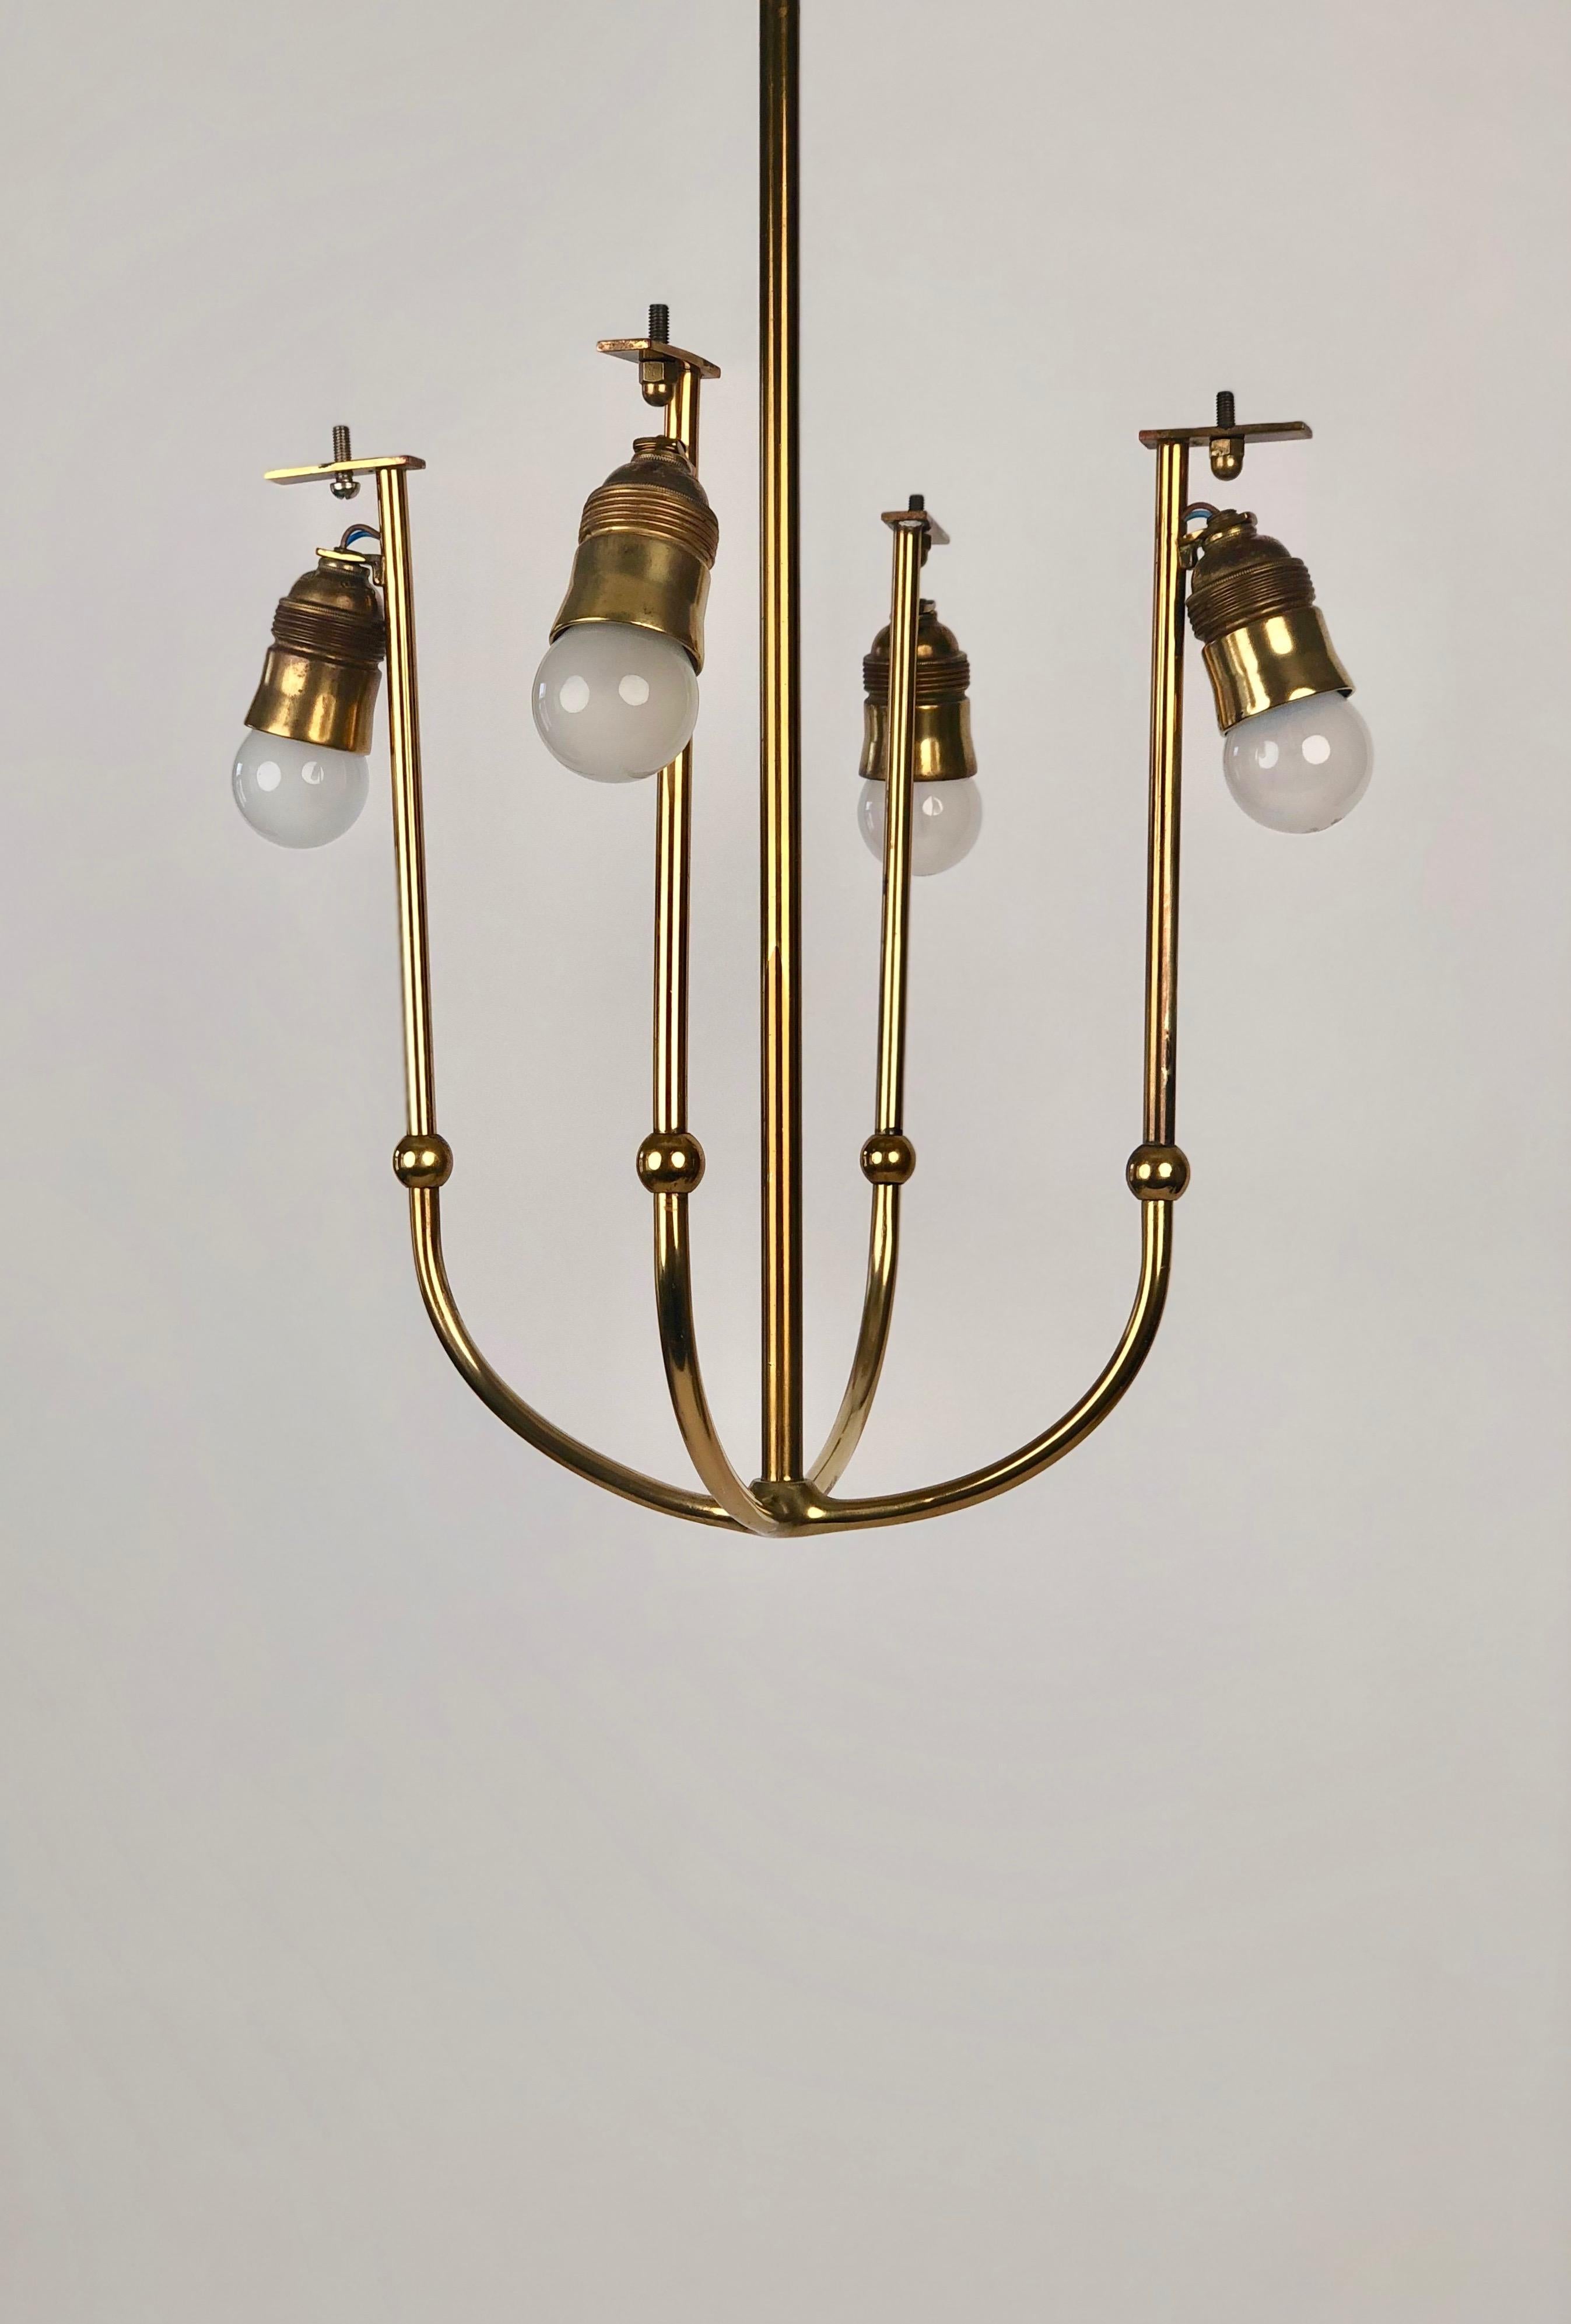 Four Arm Chandelier in Brass with Silk Shades , 1930's, Austria For Sale 6